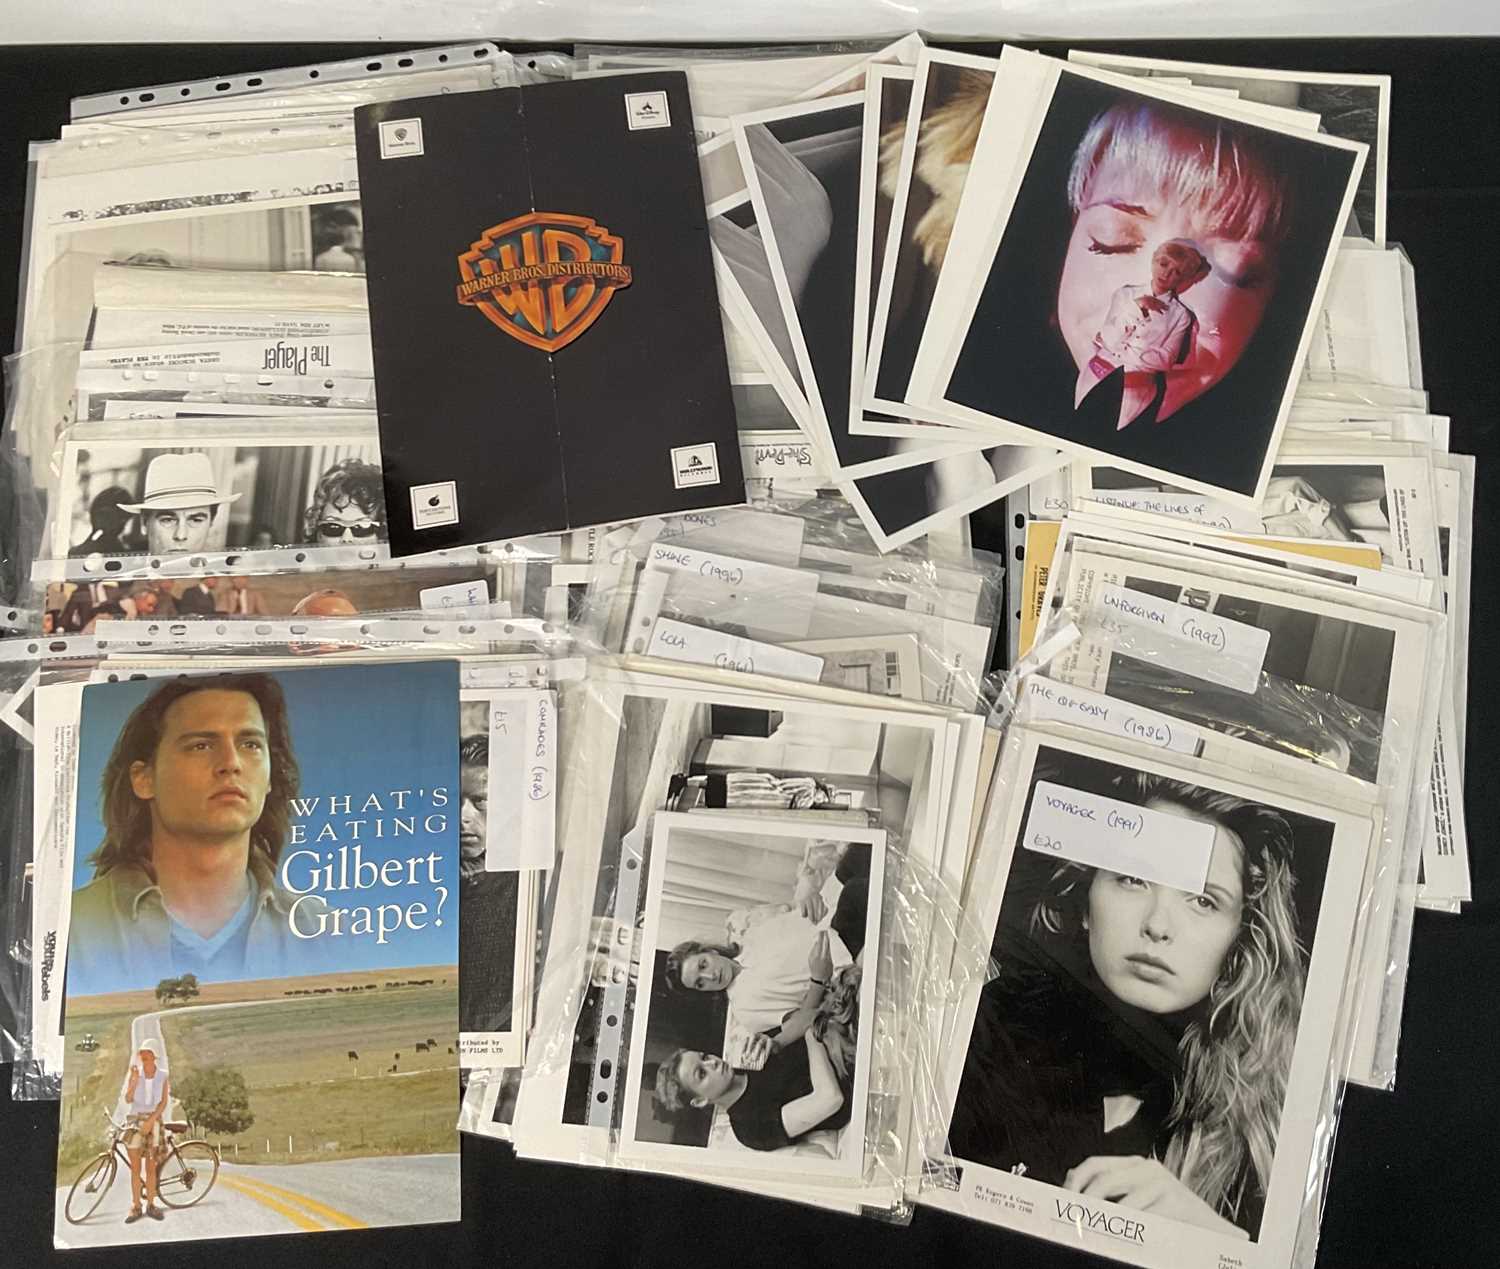 A large quantity of promotional movie ephemera comprising of photographic stills, press material